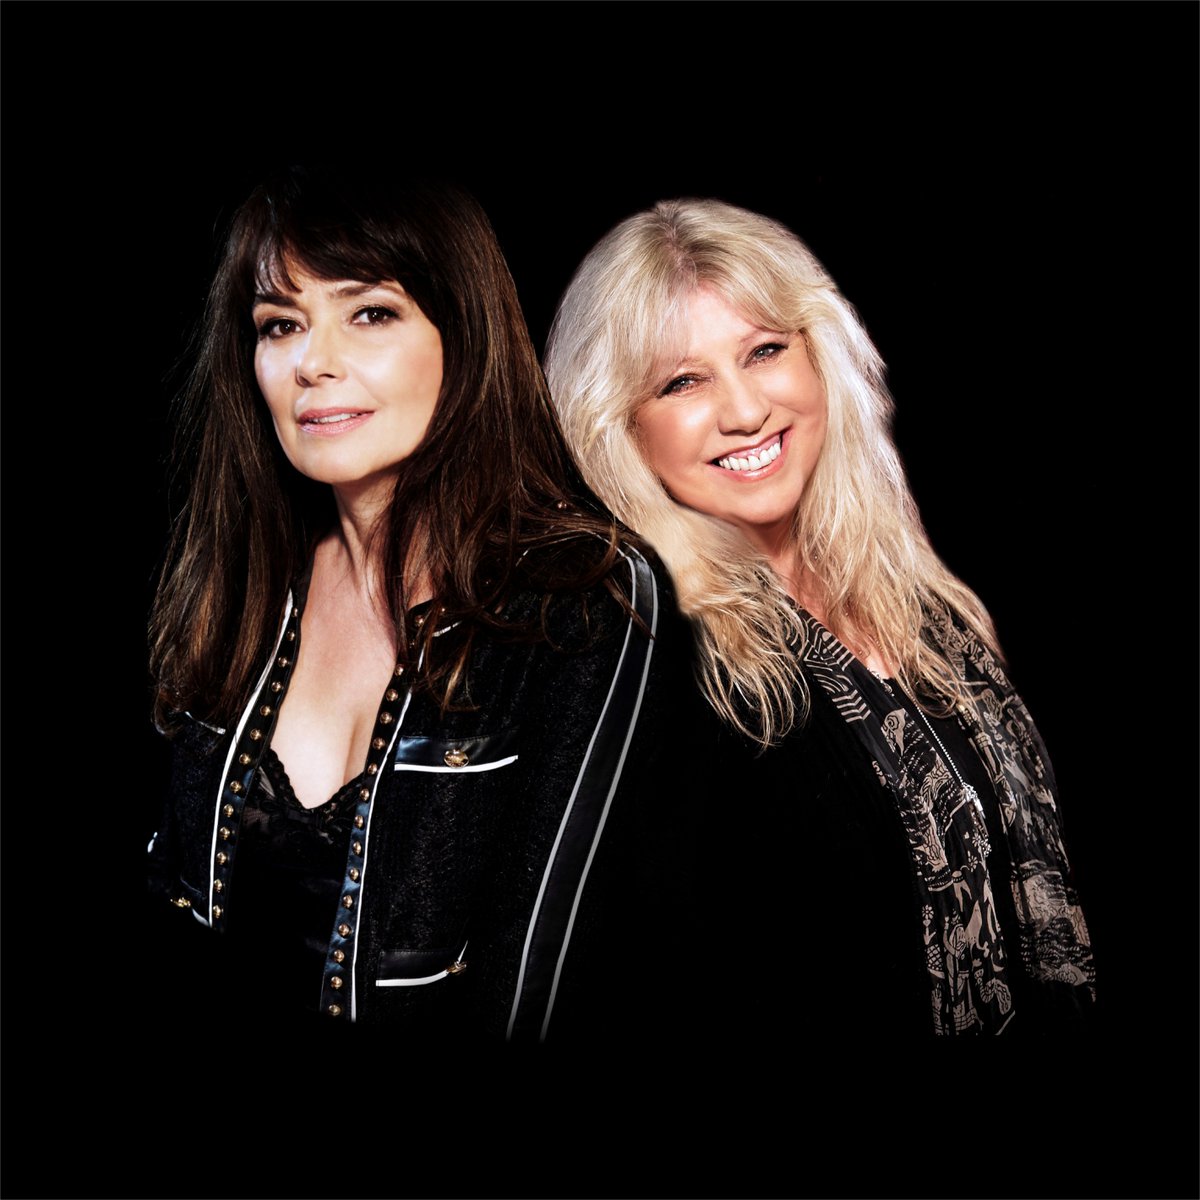 👏Due to public demand - more tickets released 👏

@BeverleyCraven & @judietzuke 
Strings Attached
Saturday 25 November | 8pm | @StablesMK 

Book now 👇
stables.org/event/beverley…